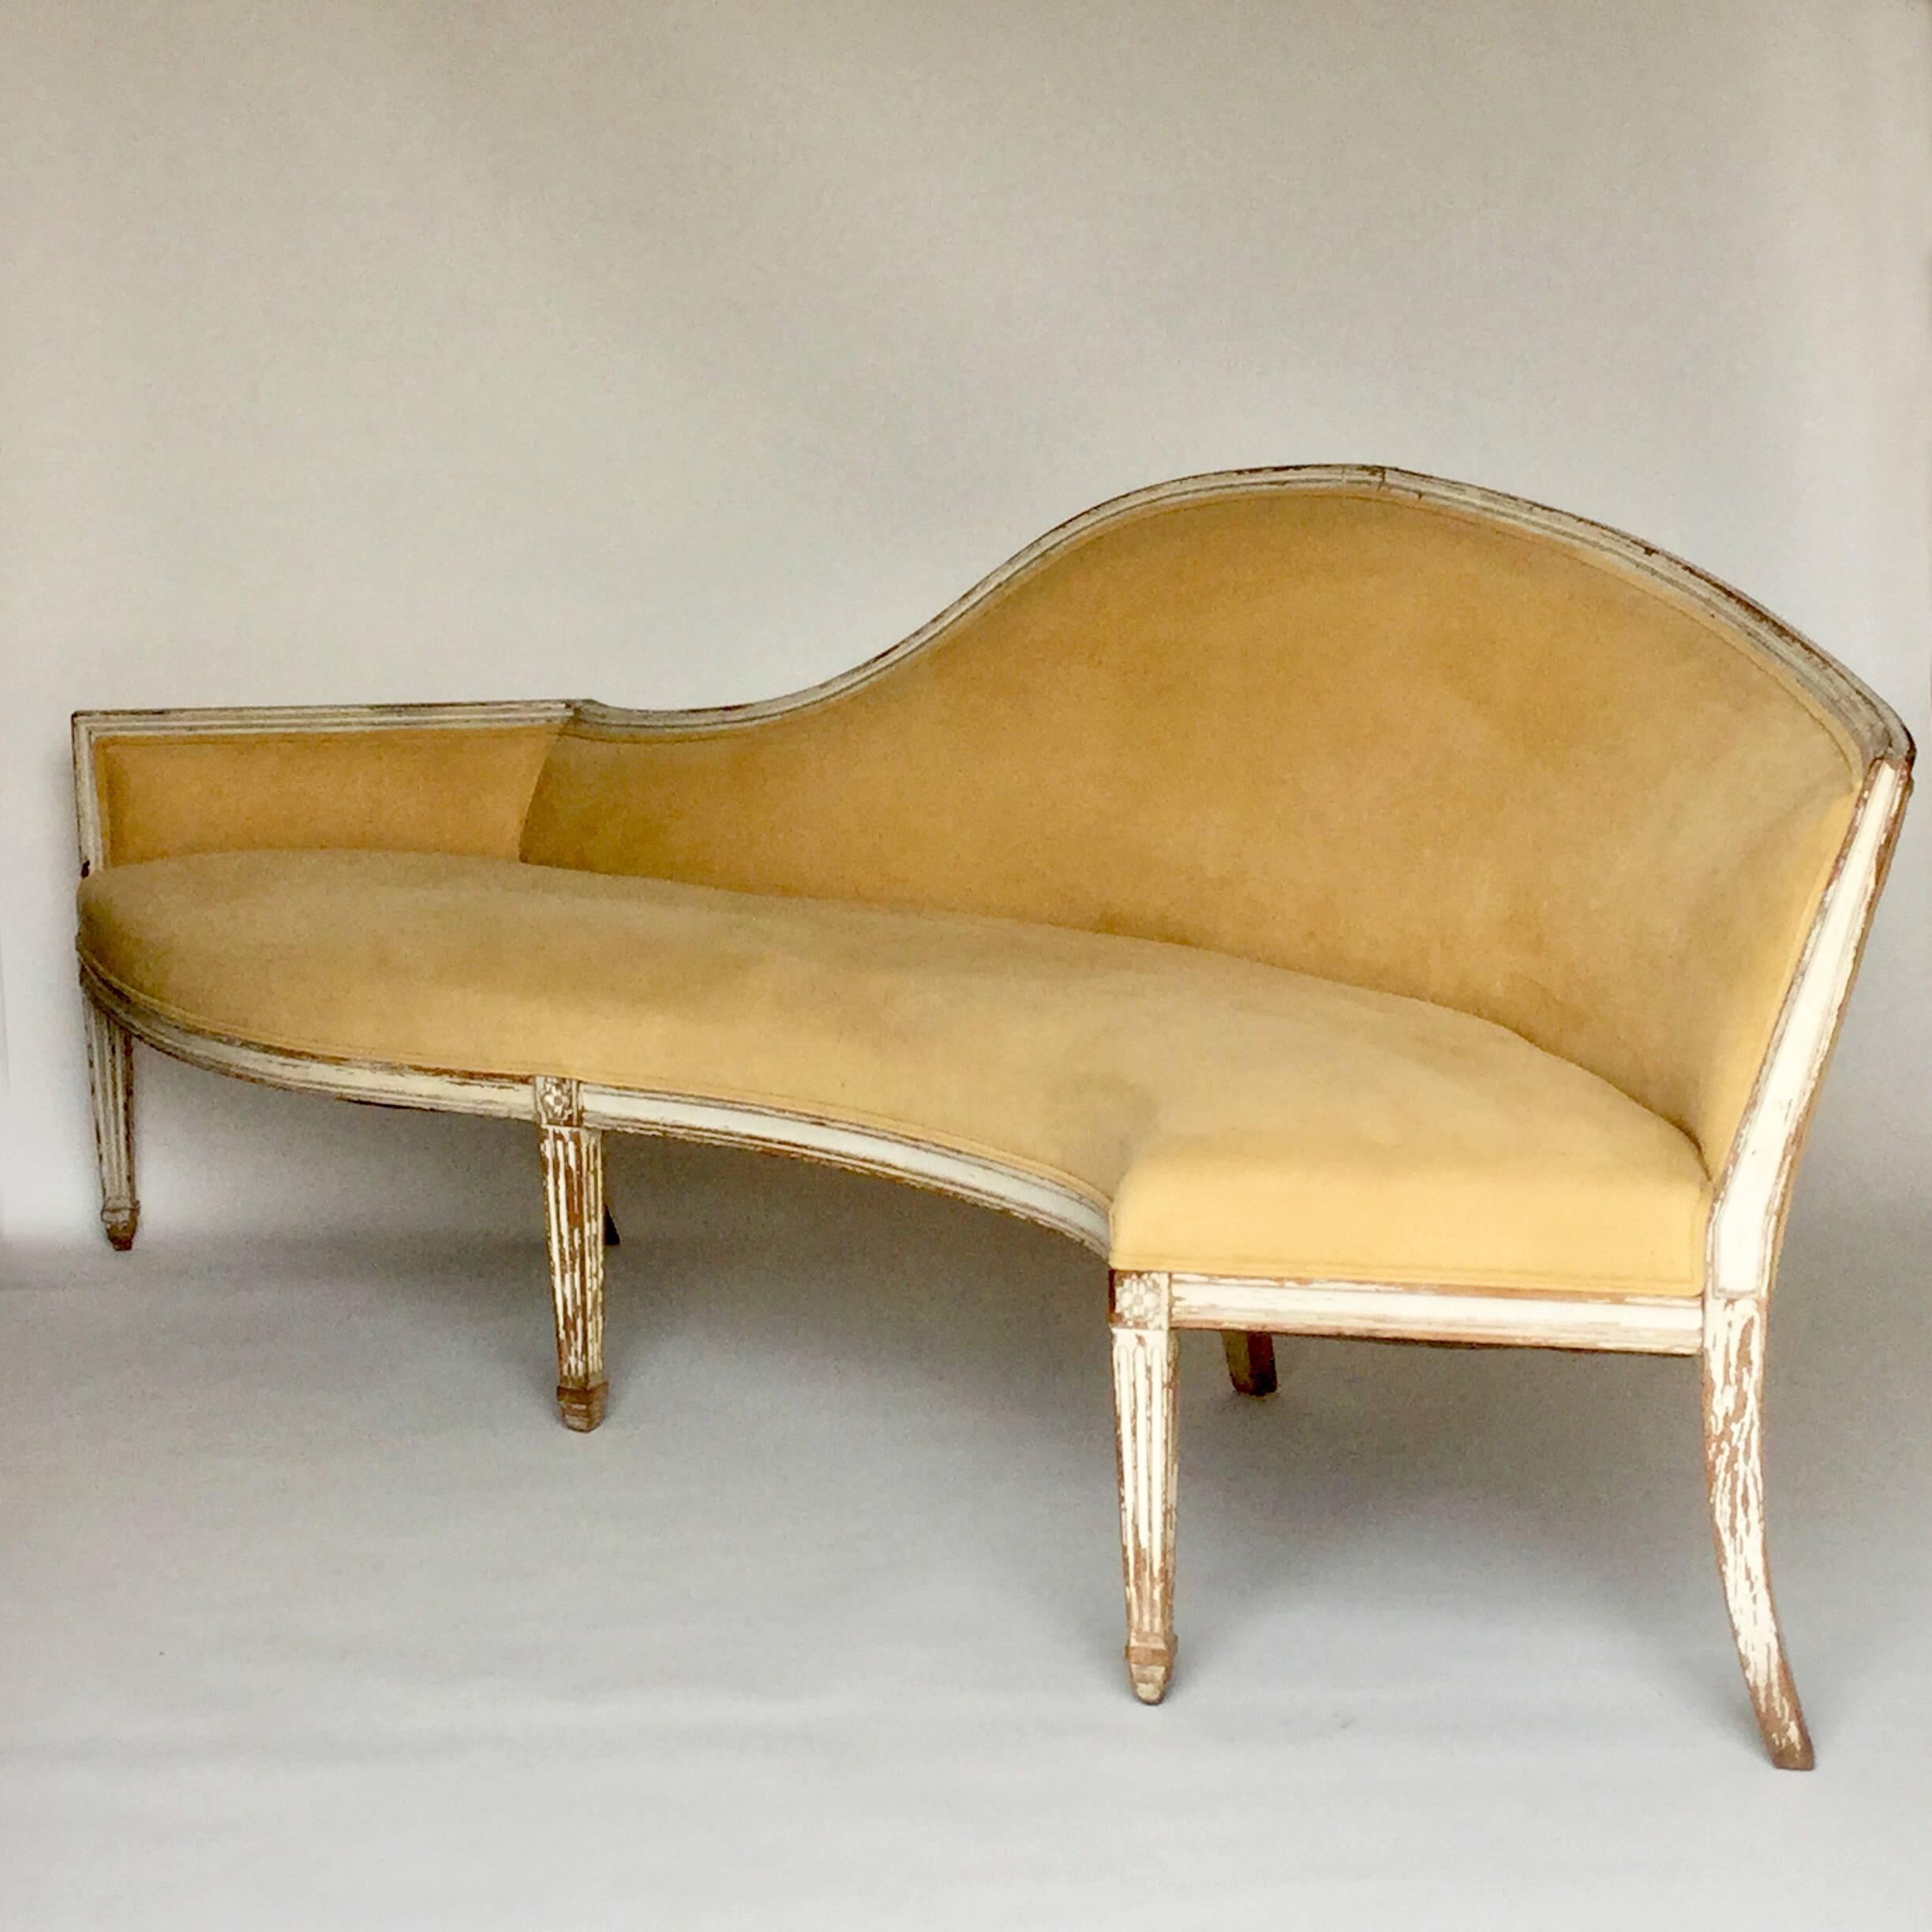 Antique French Louis XVI carved walnut settee, painted finish worn with age, unusual sinuous shaped design, reupholstered in buff colored ultra suede with a tiny whole near the back of the seat, square fluted tapering legs with floral rosette